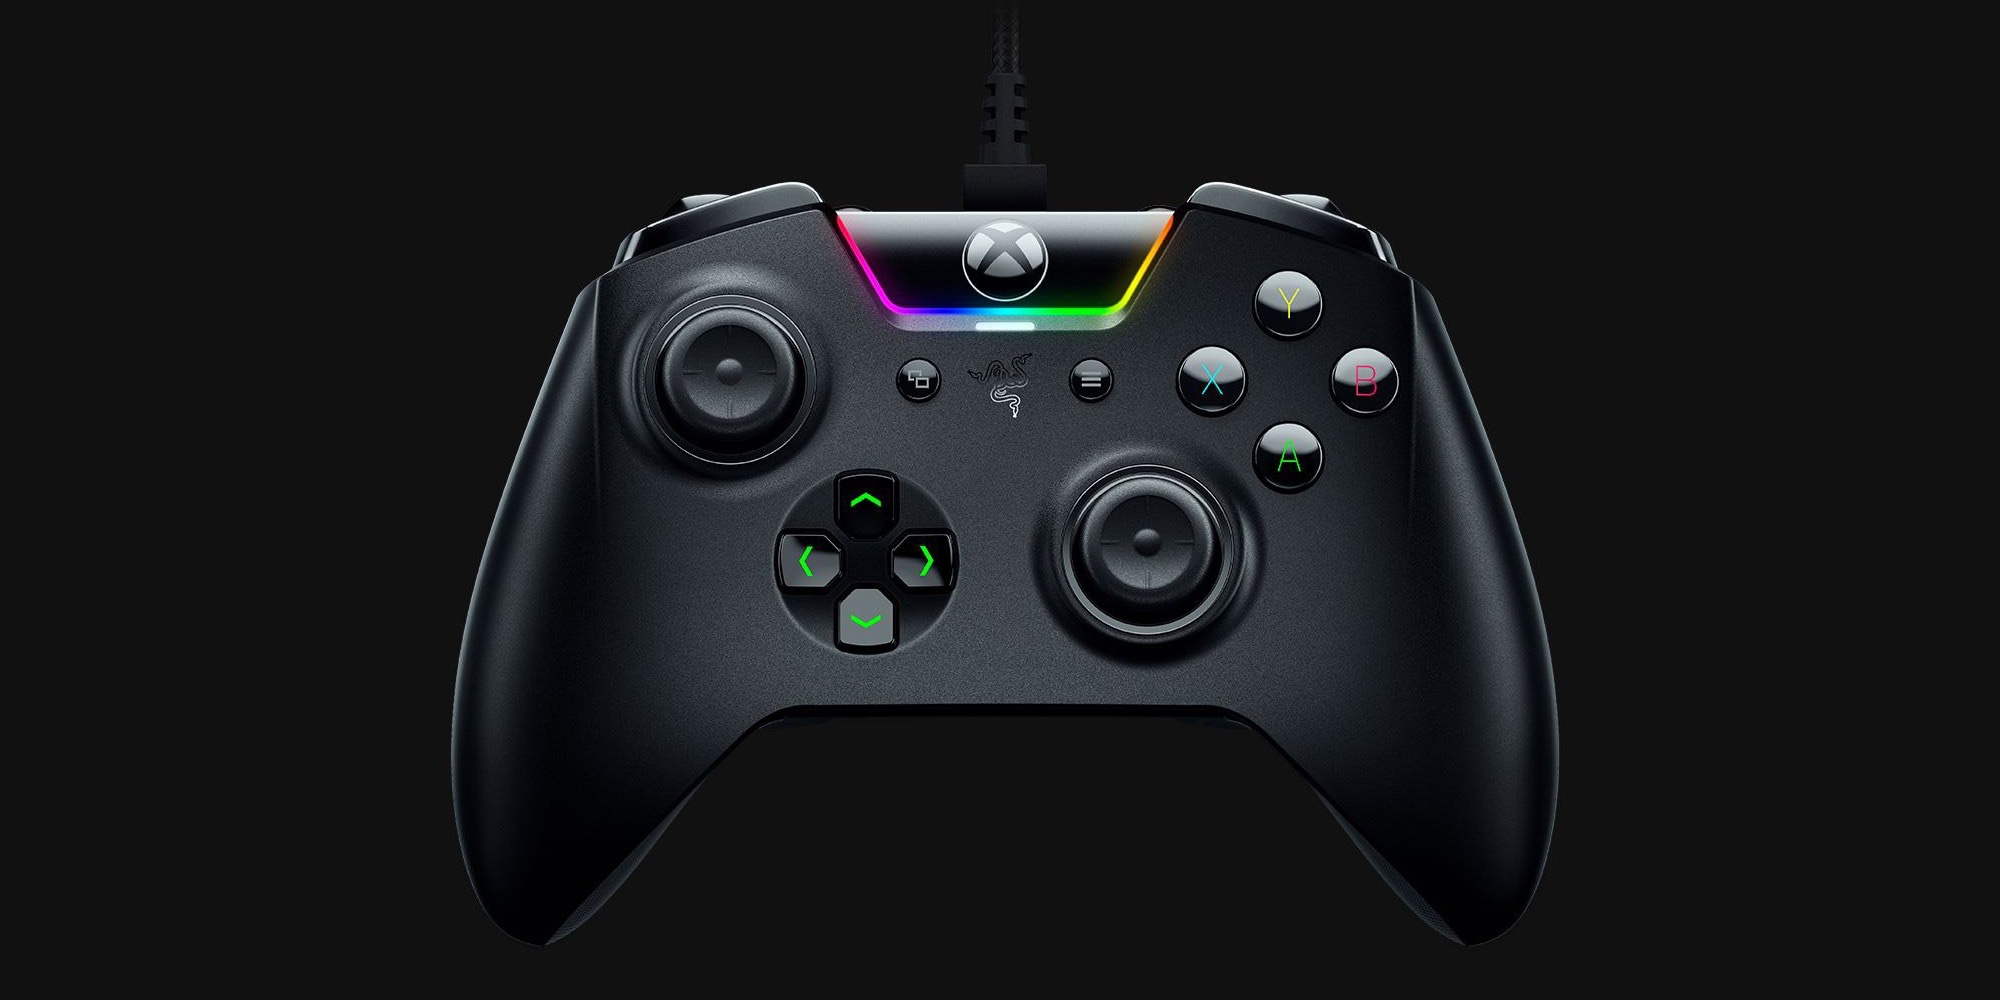 Razer's Wolverine controller brings customization to Xbox Series X at $90  (25% off) - 9to5Toys